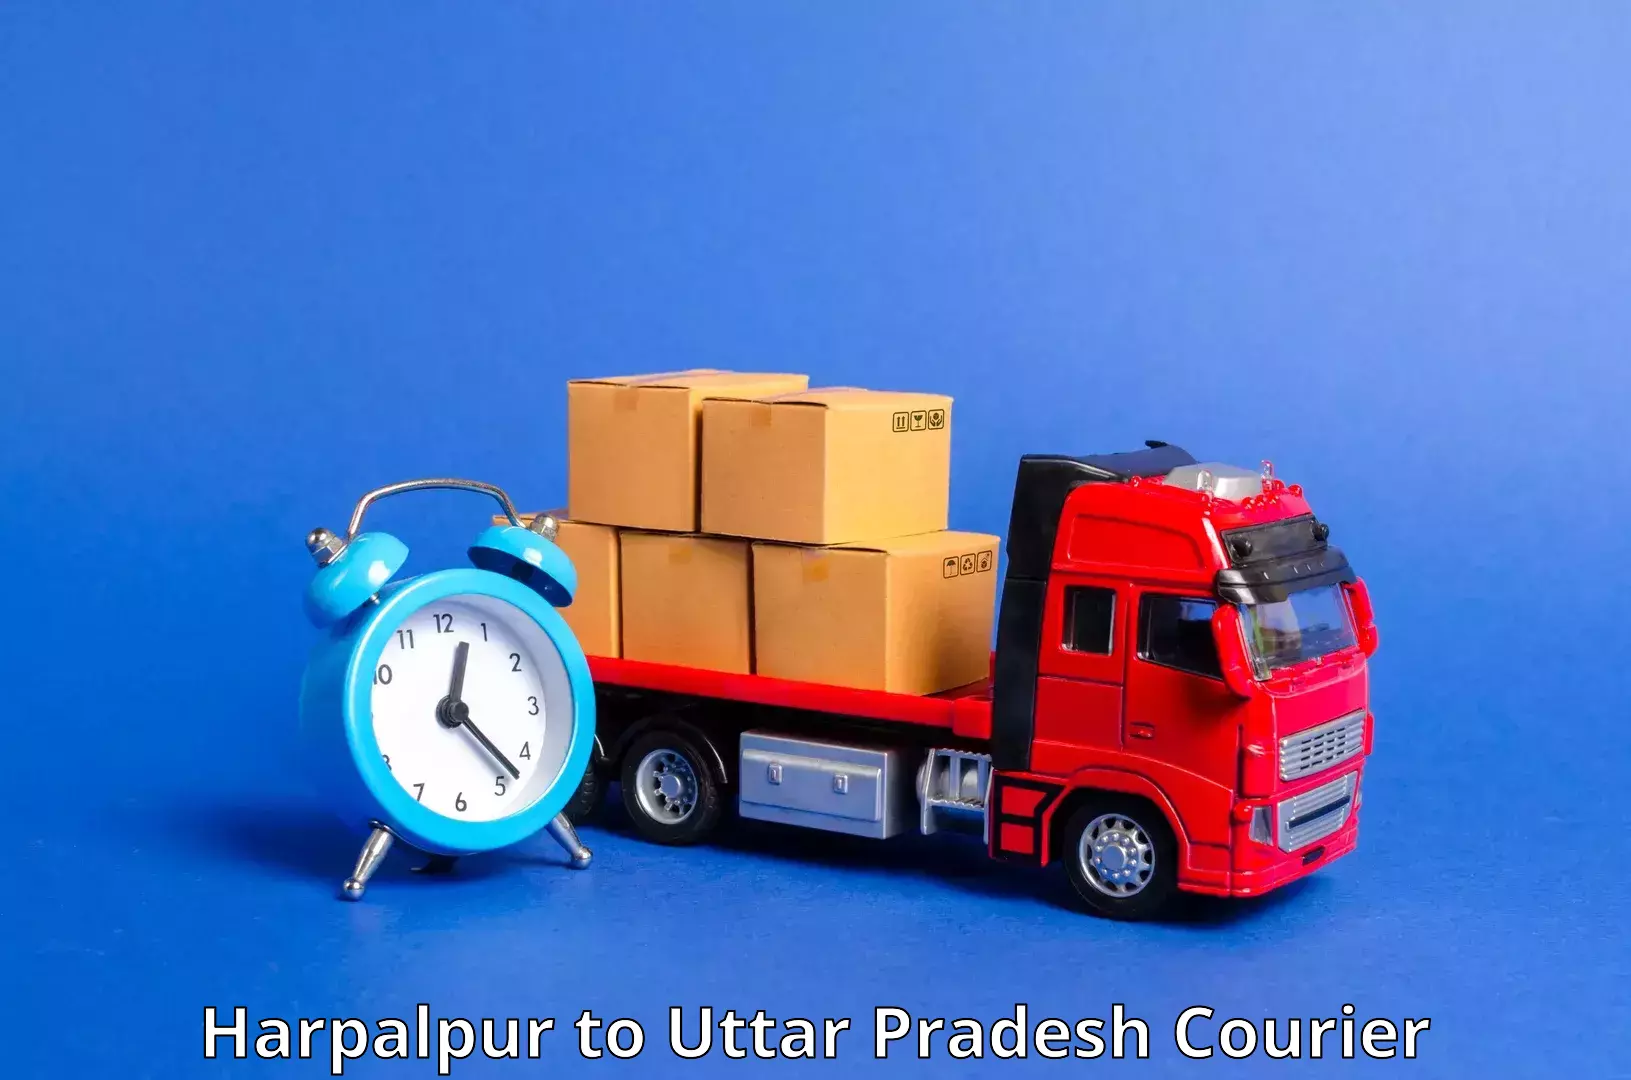 State-of-the-art courier technology in Harpalpur to Babrala